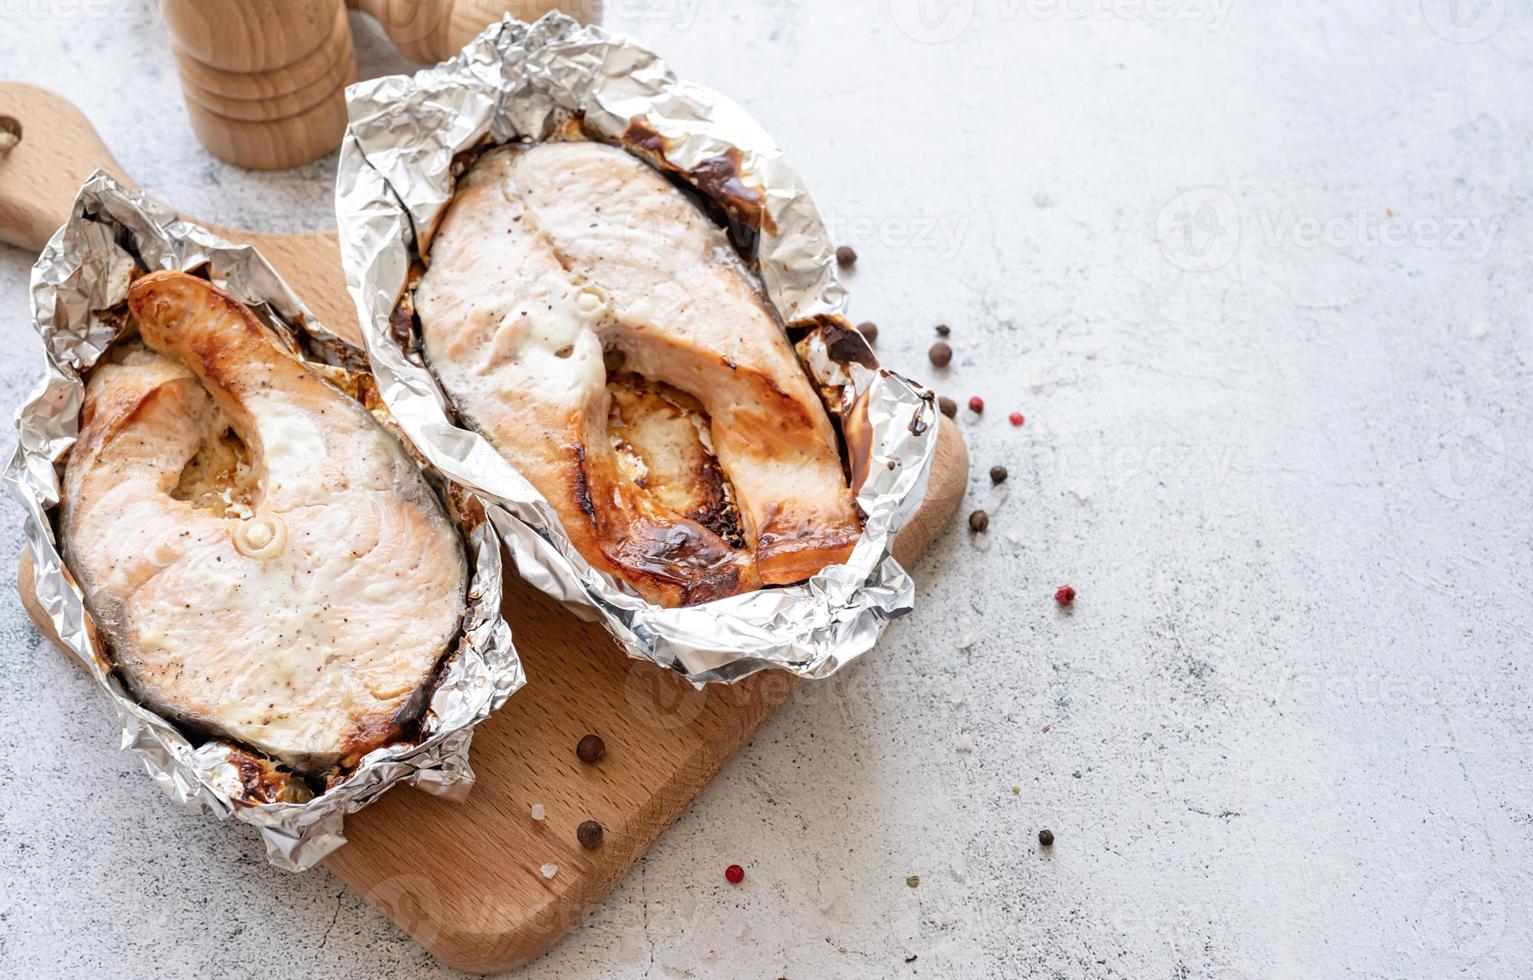 Grilled salmon steak on wooden cutting board on concrete background. Top view photo